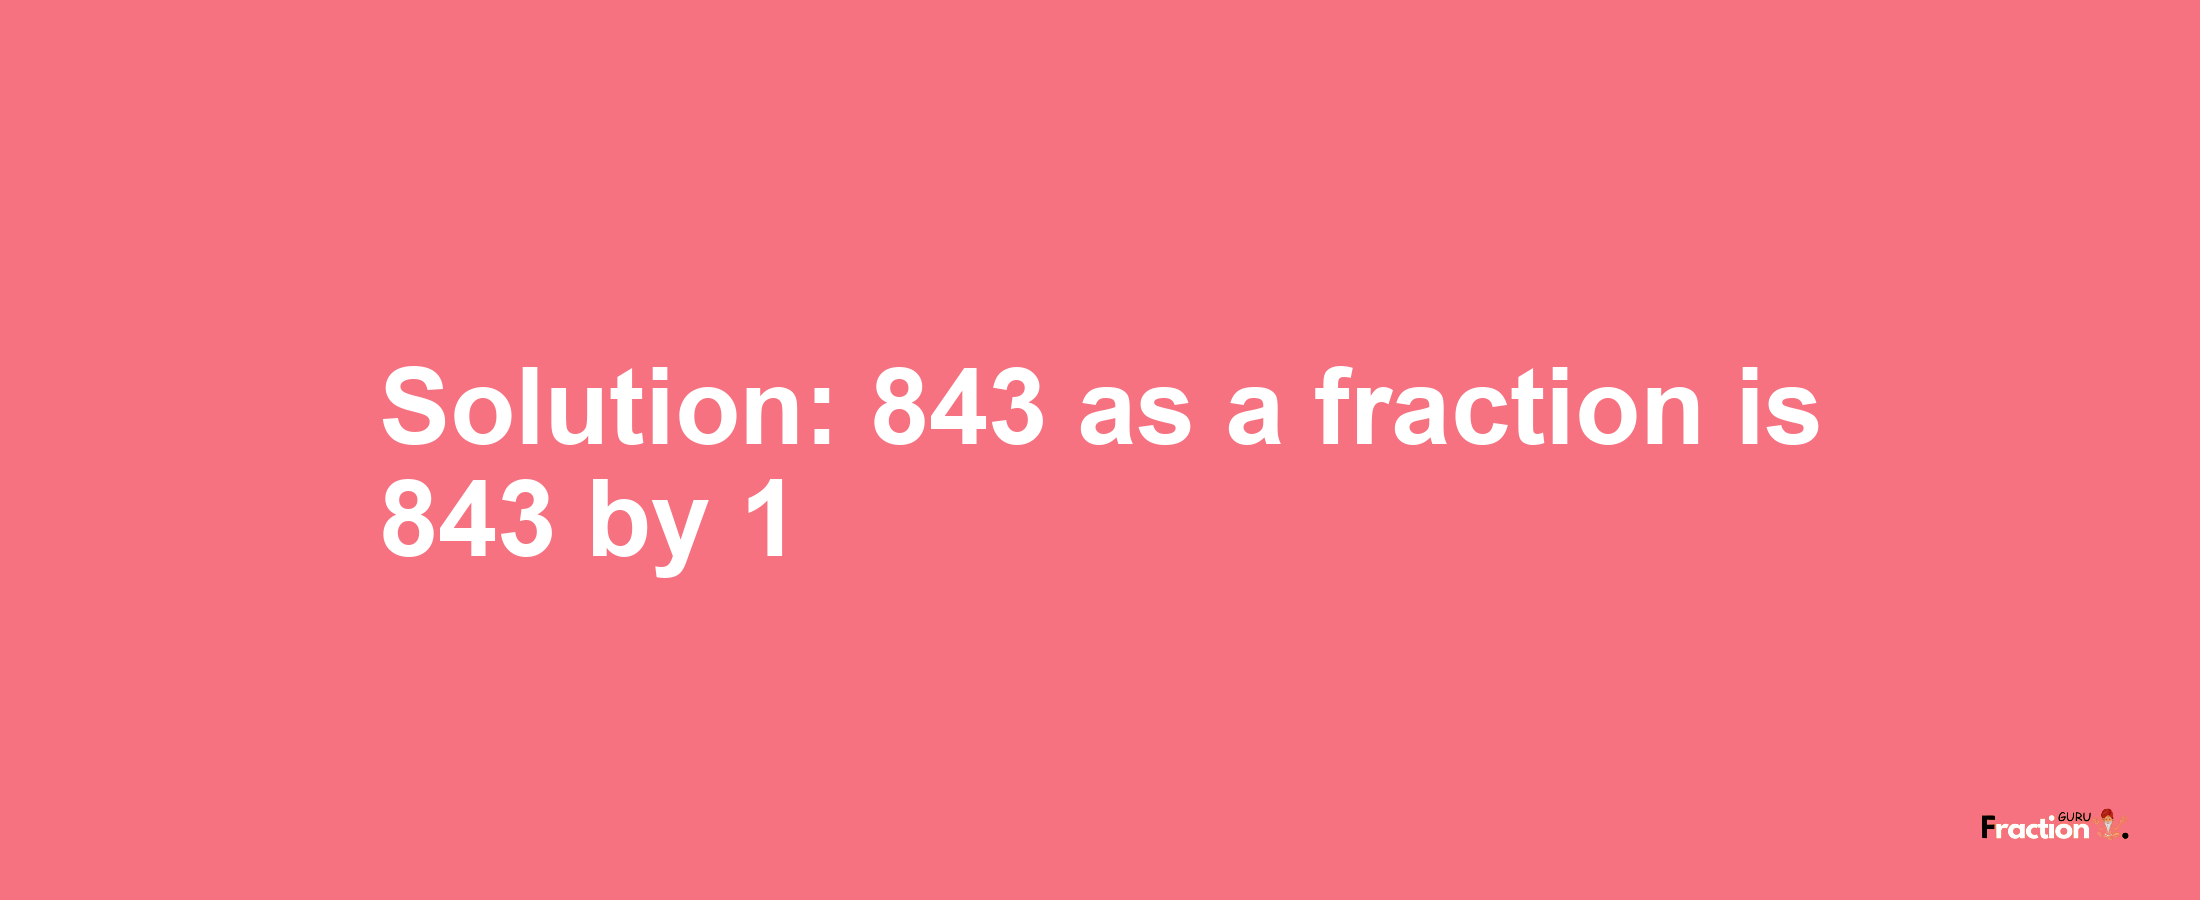 Solution:843 as a fraction is 843/1